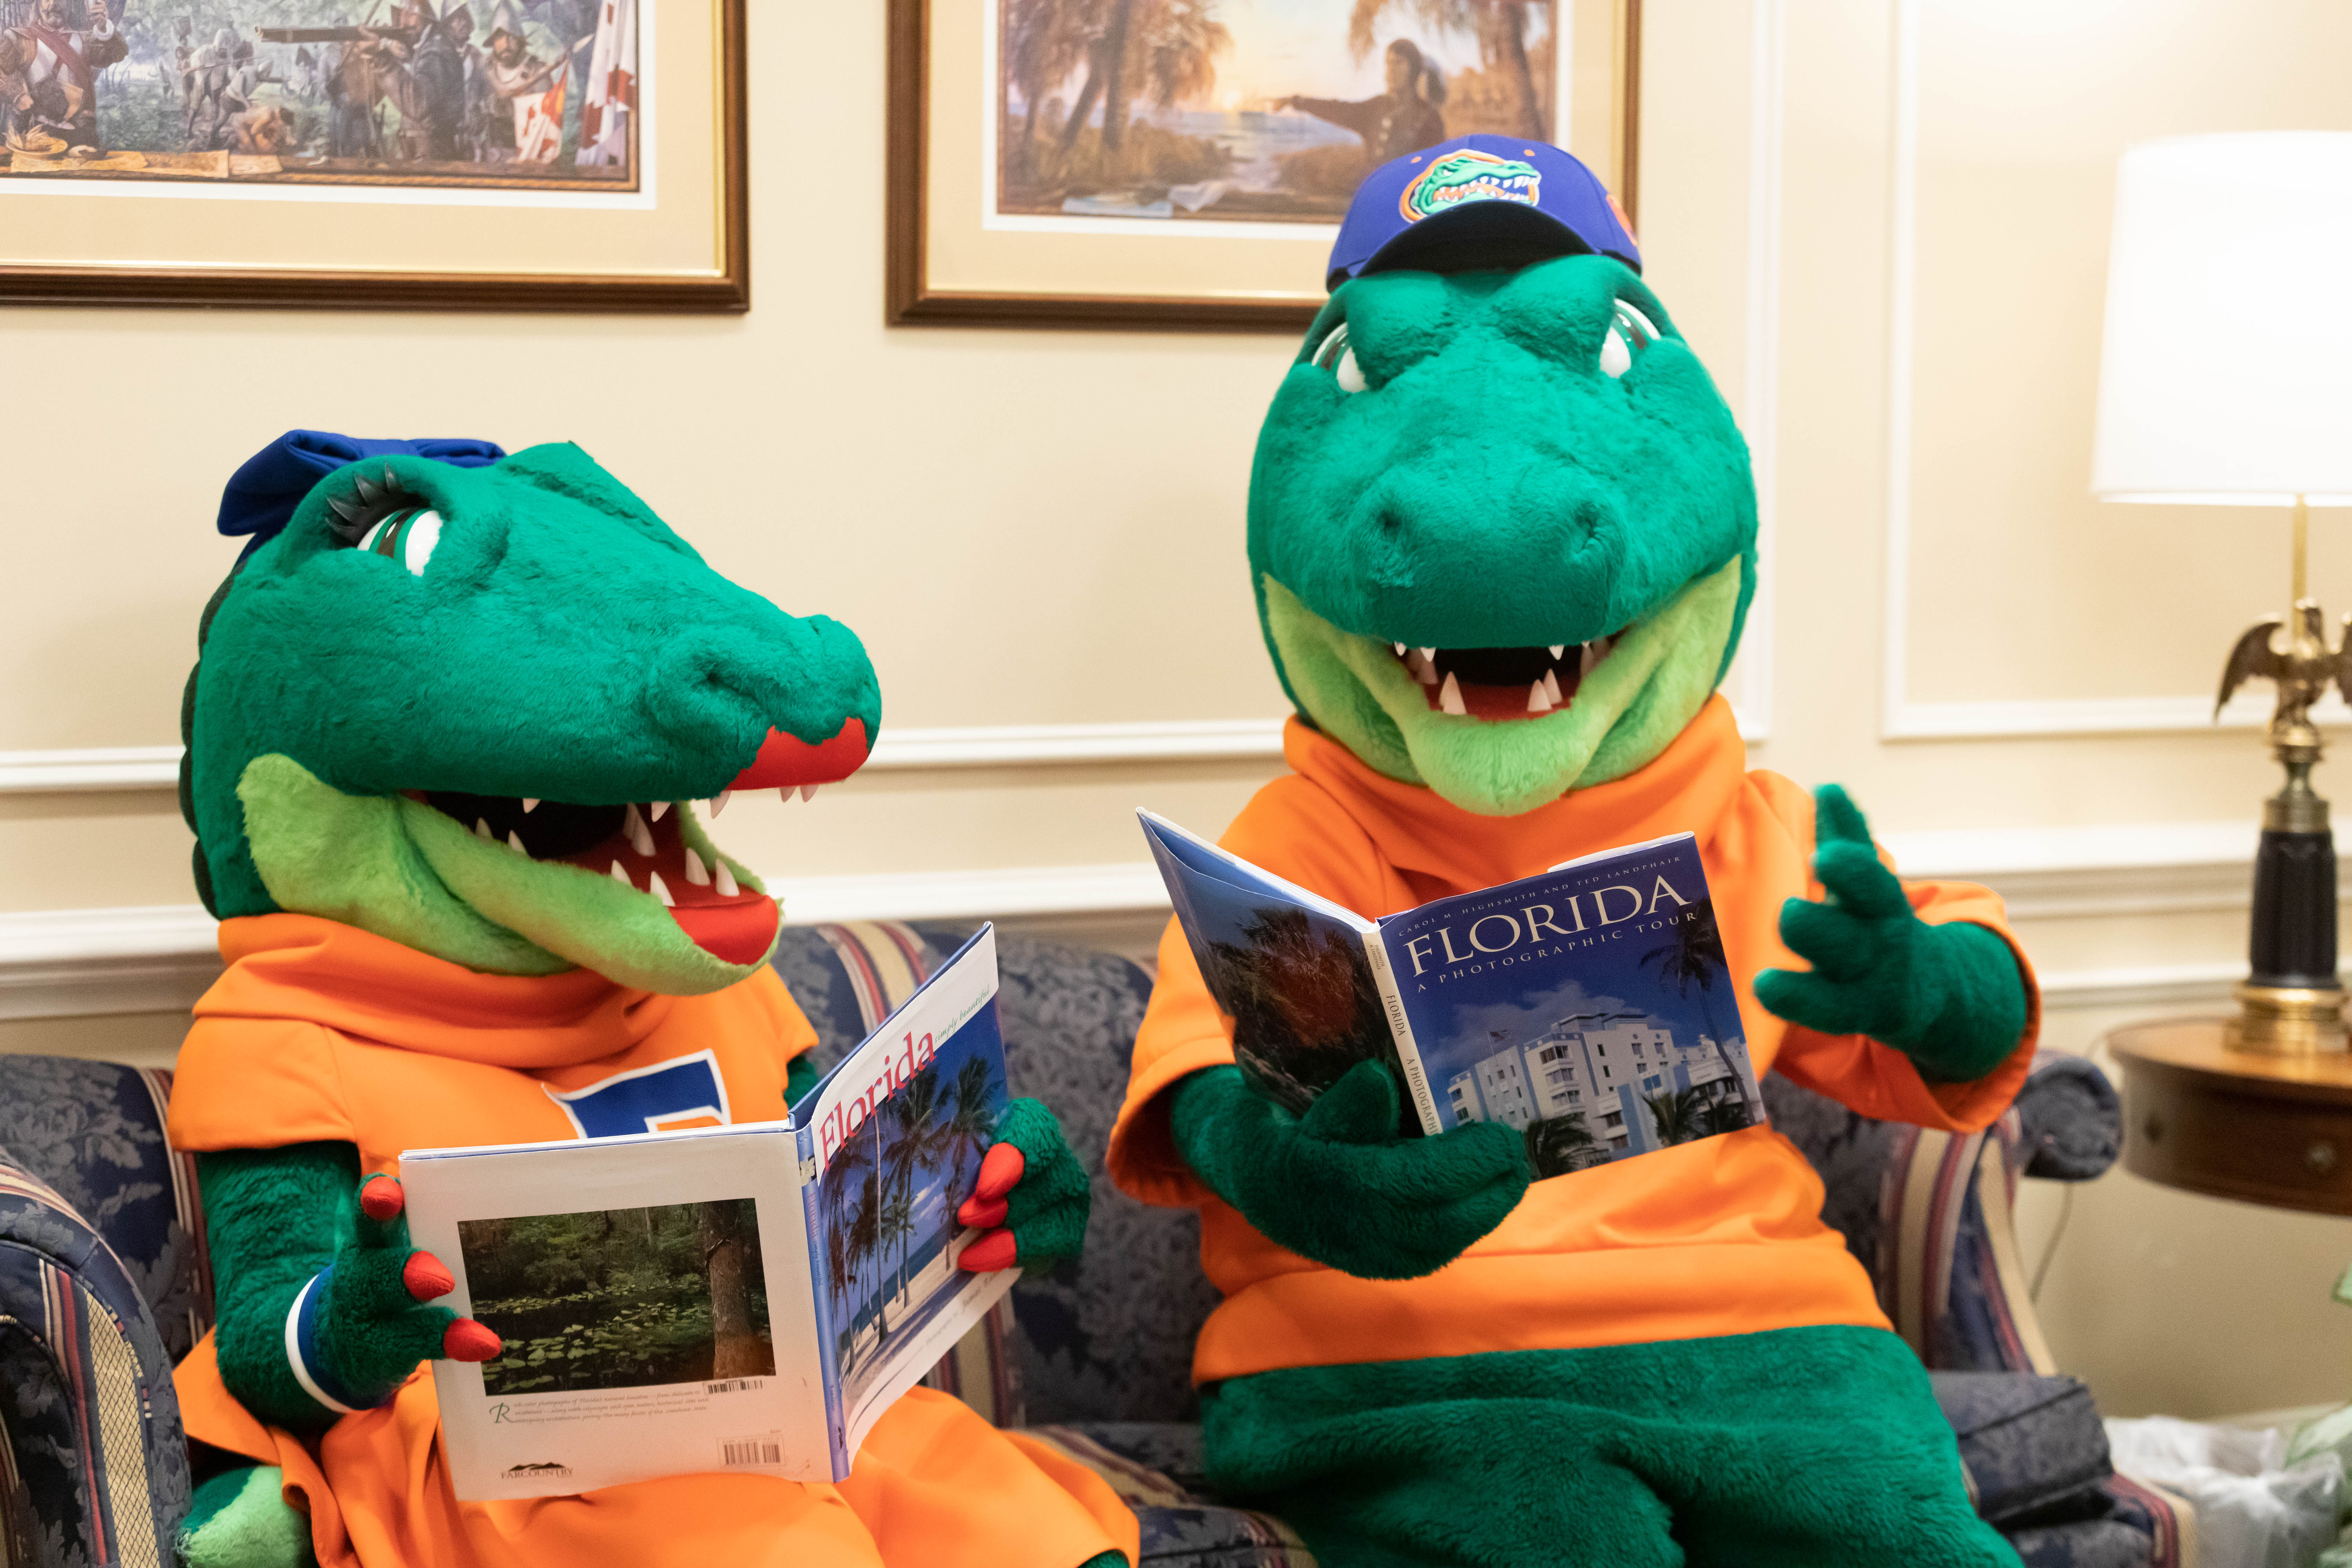 The University of Florida mascots, Albert and Alberta, read books about Florida in the state capitol.